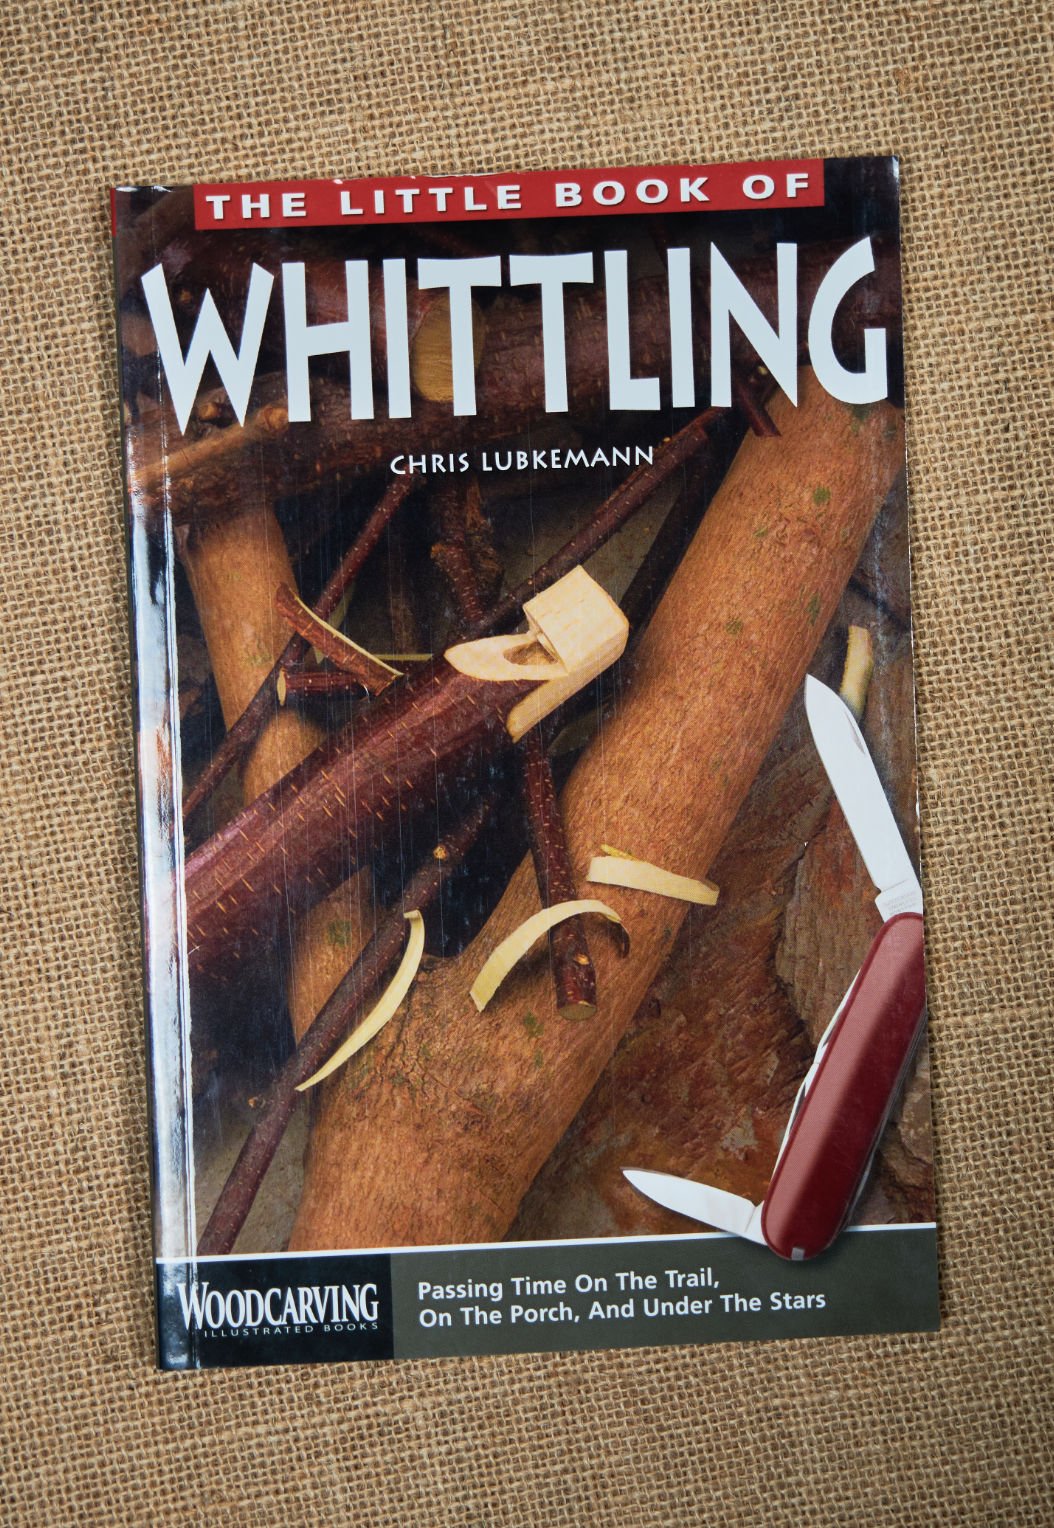 Little Book of Whittling - Lee Valley Tools